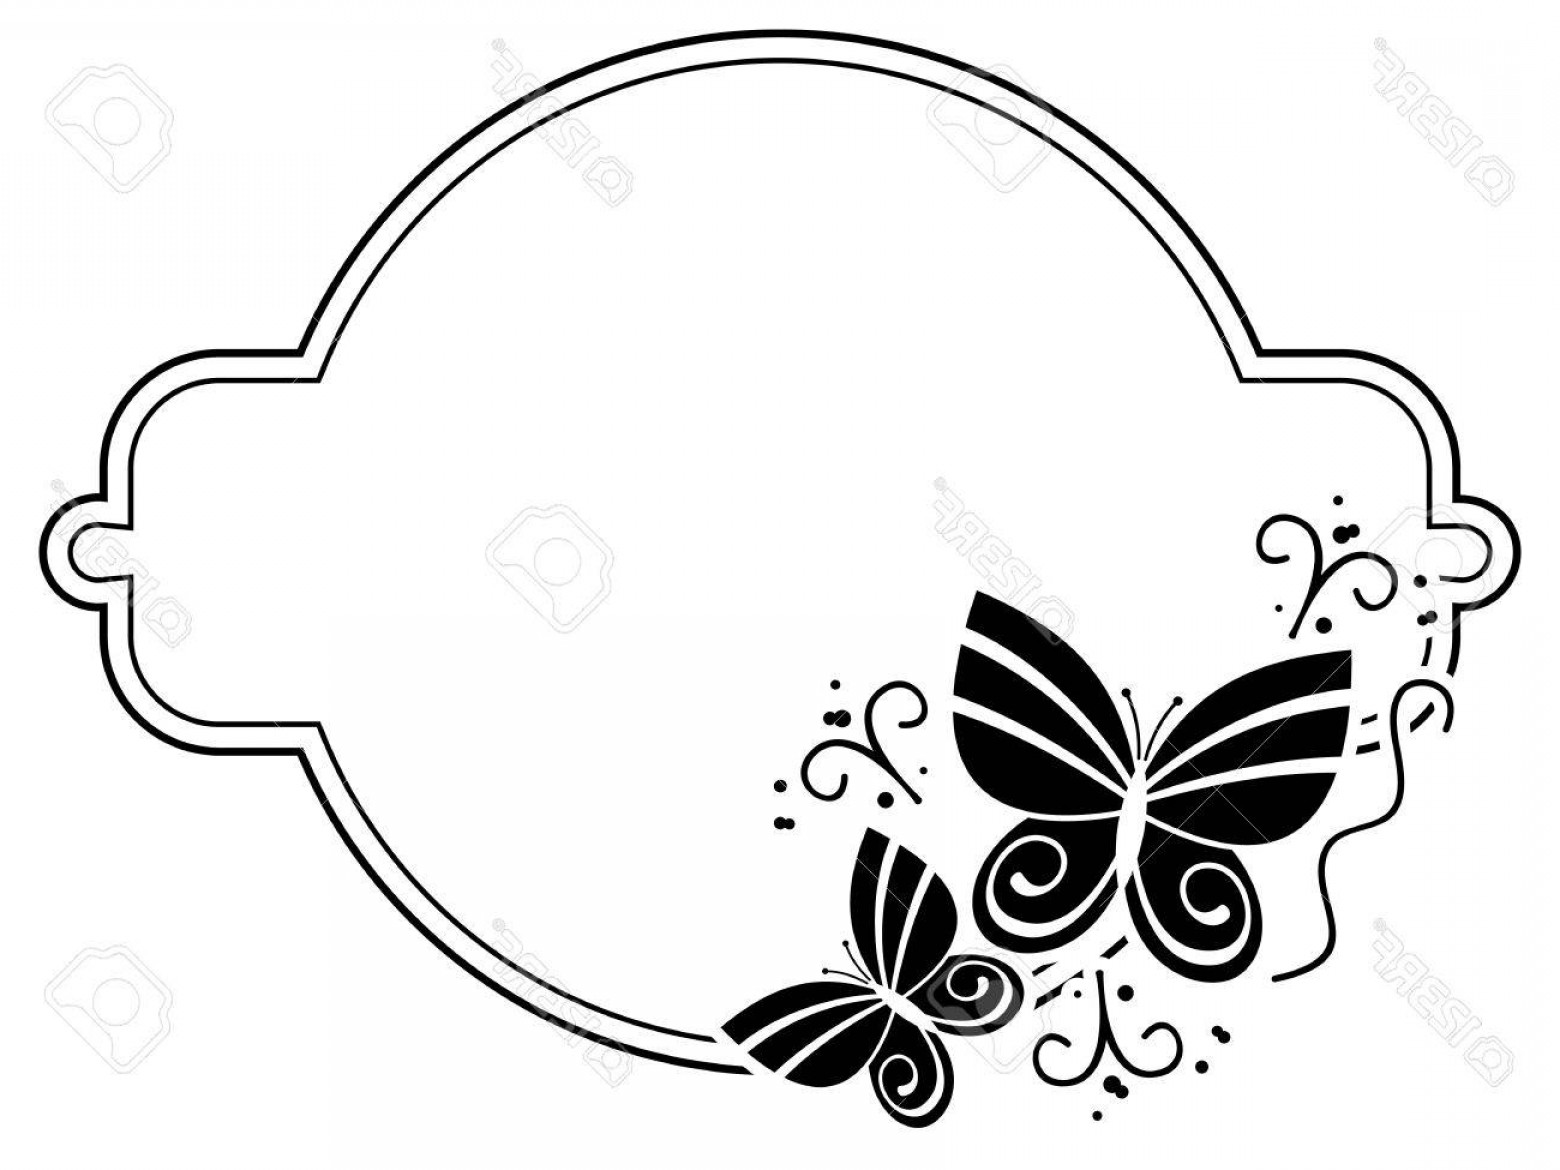 Photostock Vector Black And White Silhouette Round Frame